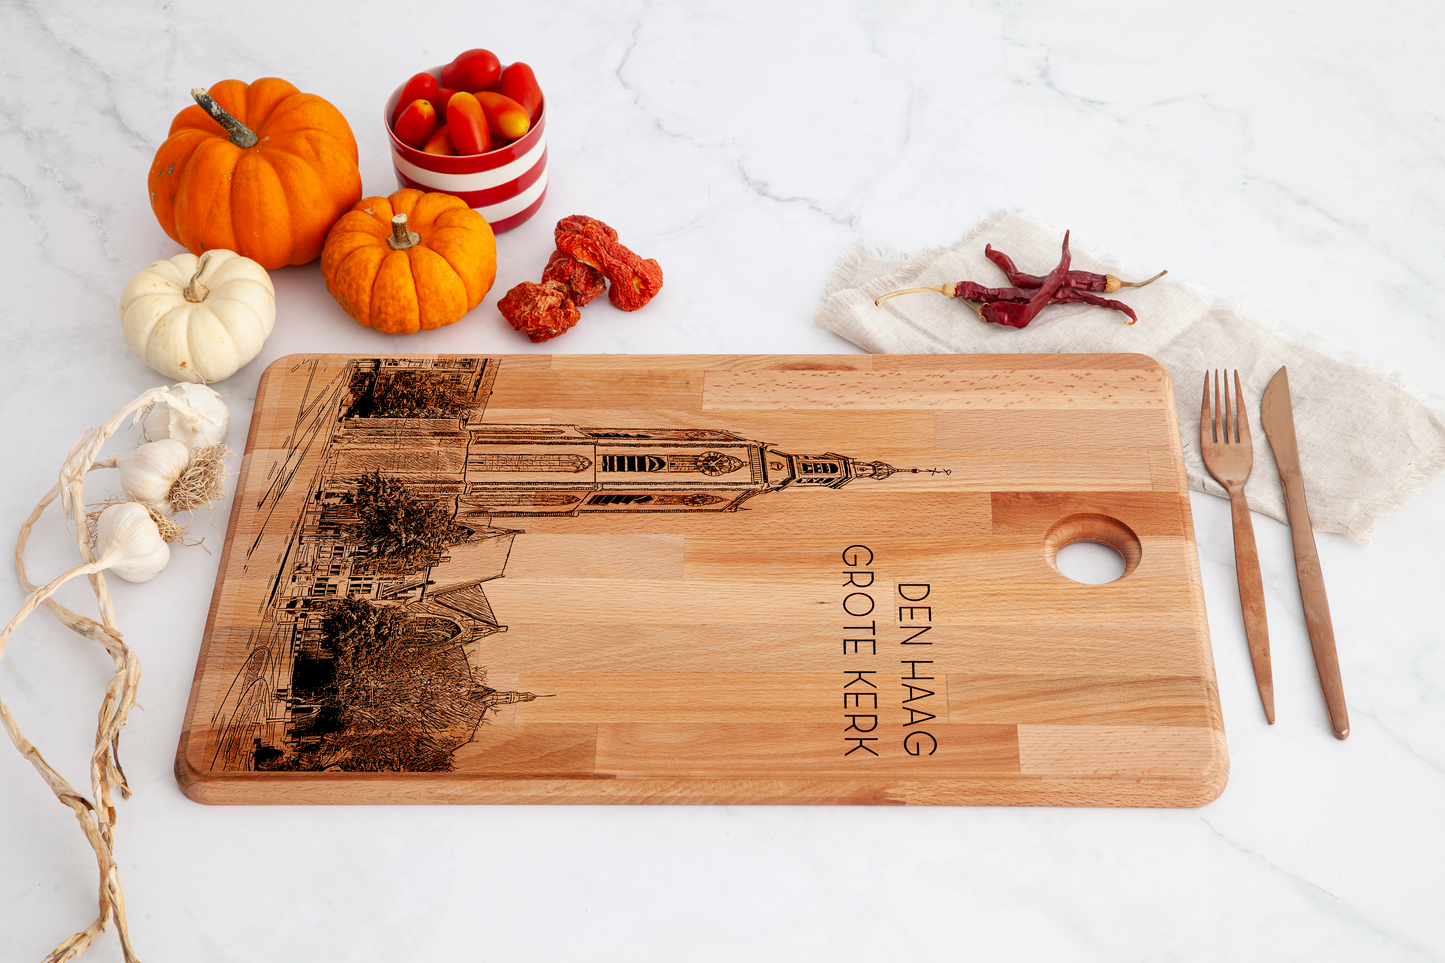 Den Haag, Grote Kerk, cutting board, with knife